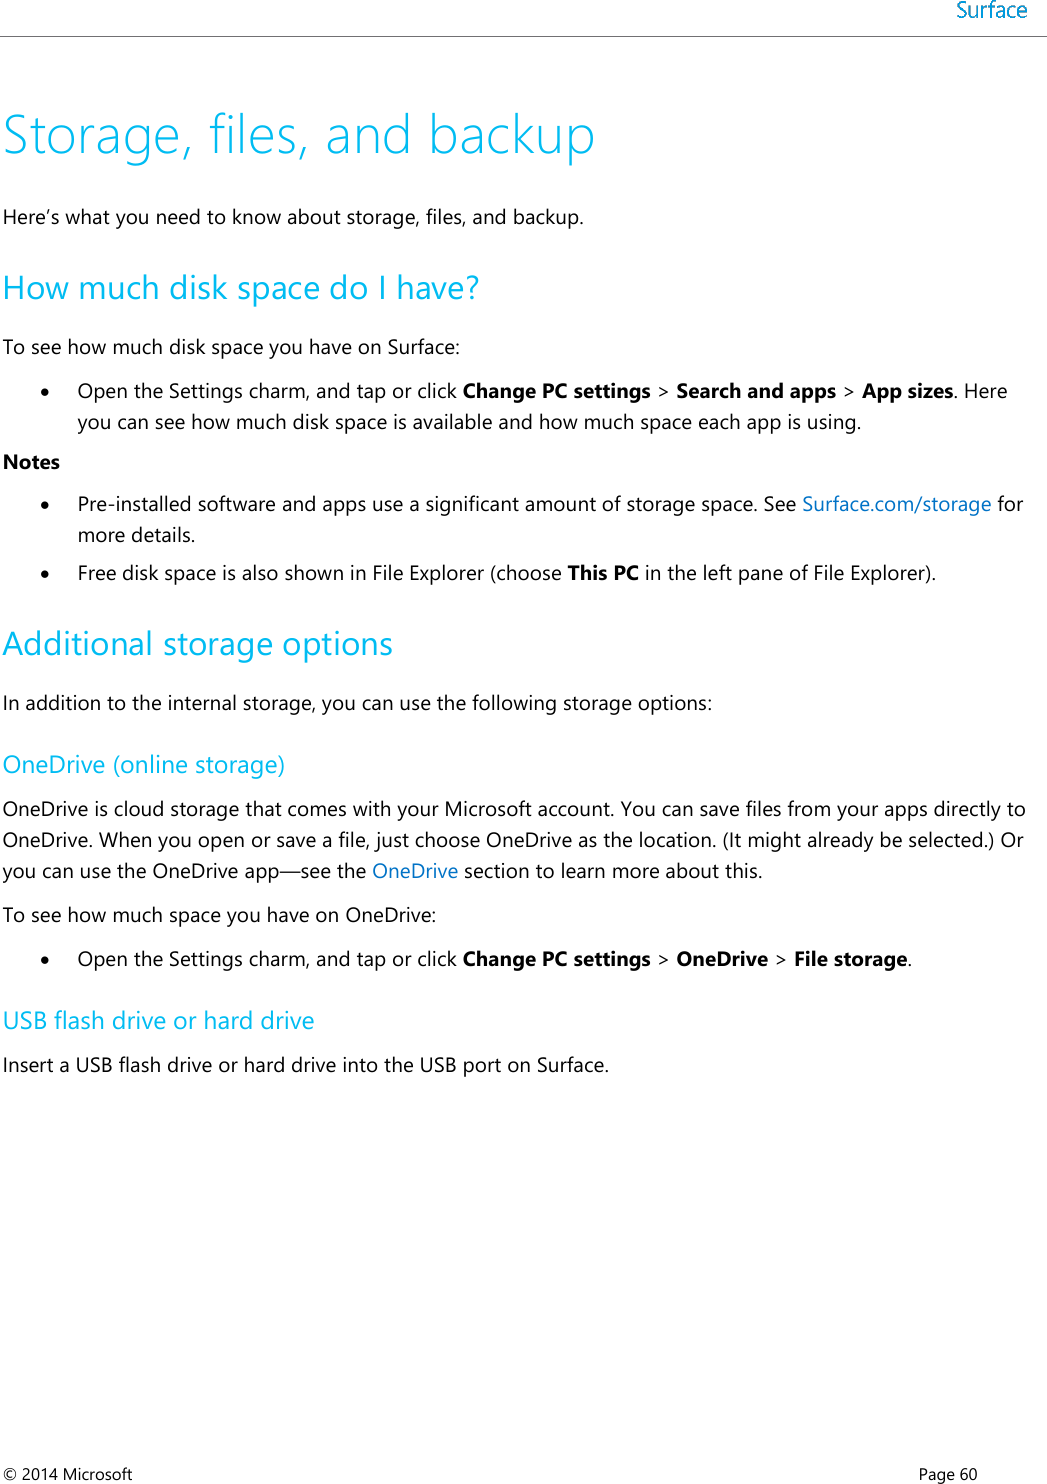  © 2014 Microsoft      Page 60  Storage, files, and backup Here’s what you need to know about storage, files, and backup. How much disk space do I have? To see how much disk space you have on Surface:  Open the Settings charm, and tap or click Change PC settings &gt; Search and apps &gt; App sizes. Here you can see how much disk space is available and how much space each app is using.  Notes  Pre-installed software and apps use a significant amount of storage space. See Surface.com/storage for more details.  Free disk space is also shown in File Explorer (choose This PC in the left pane of File Explorer).  Additional storage options  In addition to the internal storage, you can use the following storage options: OneDrive (online storage) OneDrive is cloud storage that comes with your Microsoft account. You can save files from your apps directly to OneDrive. When you open or save a file, just choose OneDrive as the location. (It might already be selected.) Or you can use the OneDrive app—see the OneDrive section to learn more about this. To see how much space you have on OneDrive:  Open the Settings charm, and tap or click Change PC settings &gt; OneDrive &gt; File storage. USB flash drive or hard drive  Insert a USB flash drive or hard drive into the USB port on Surface.     